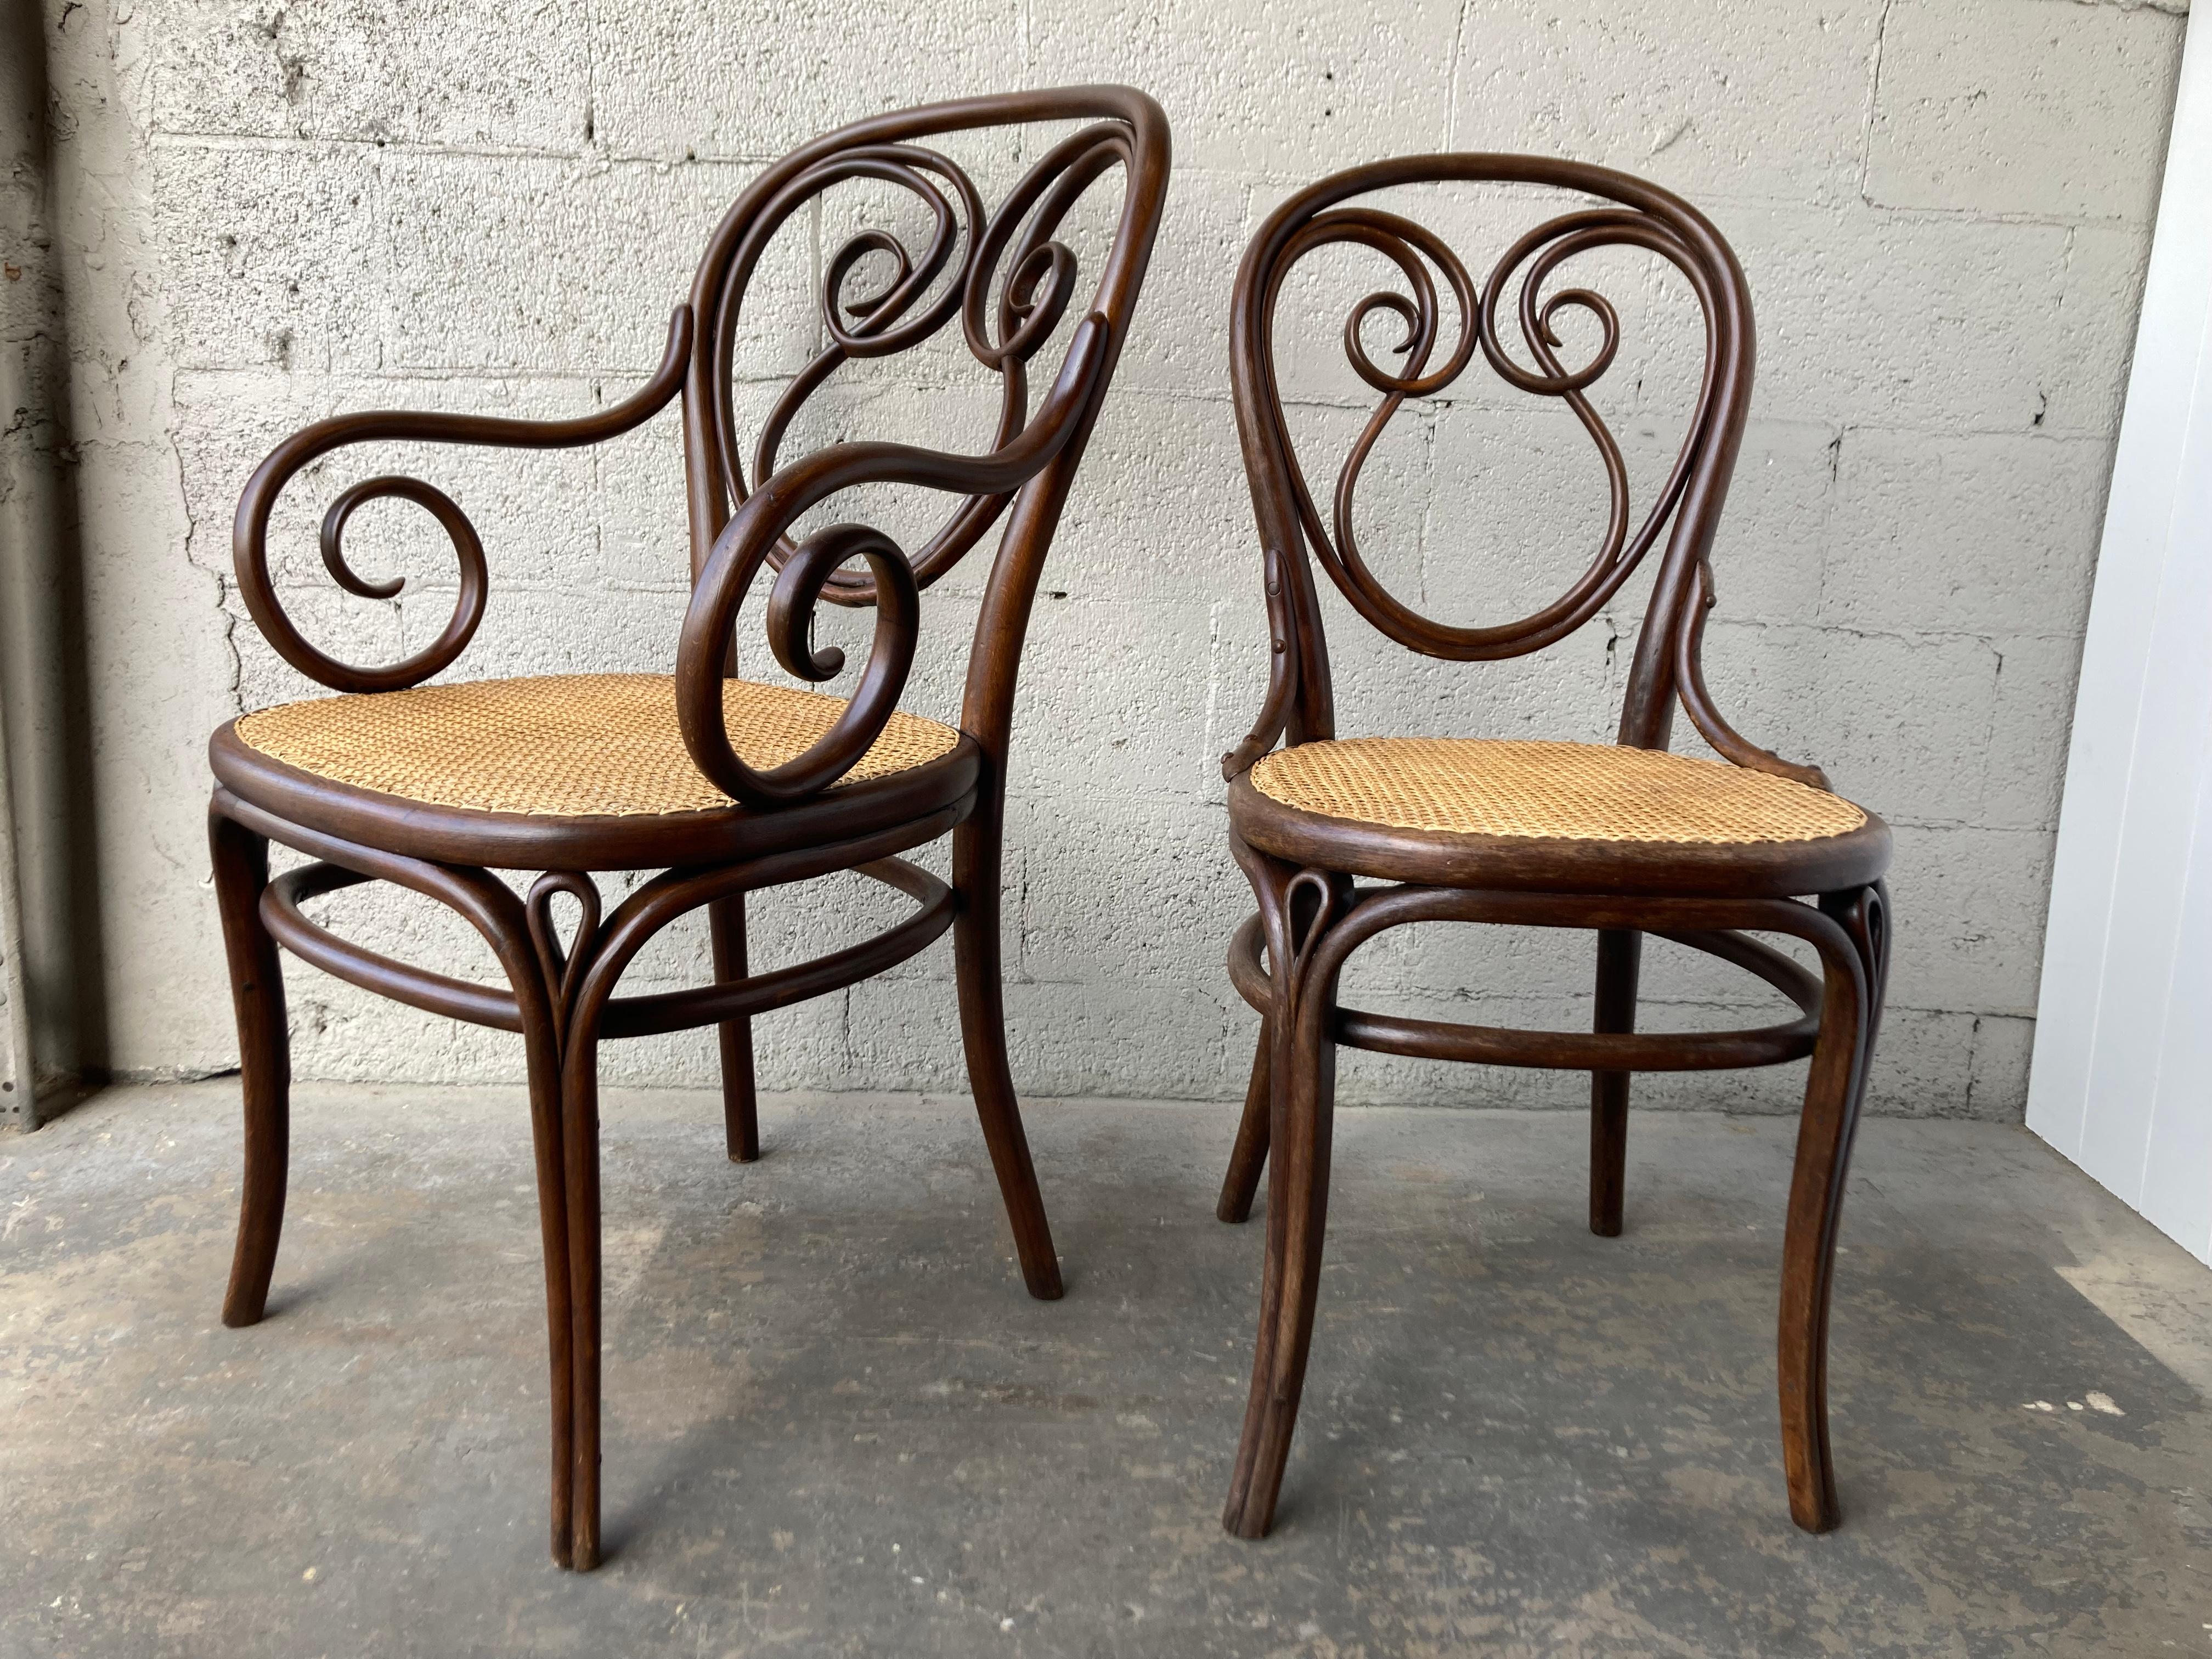 Rare Set of Thonet Chairs Model 13, Bentwood and Cane For Sale 11